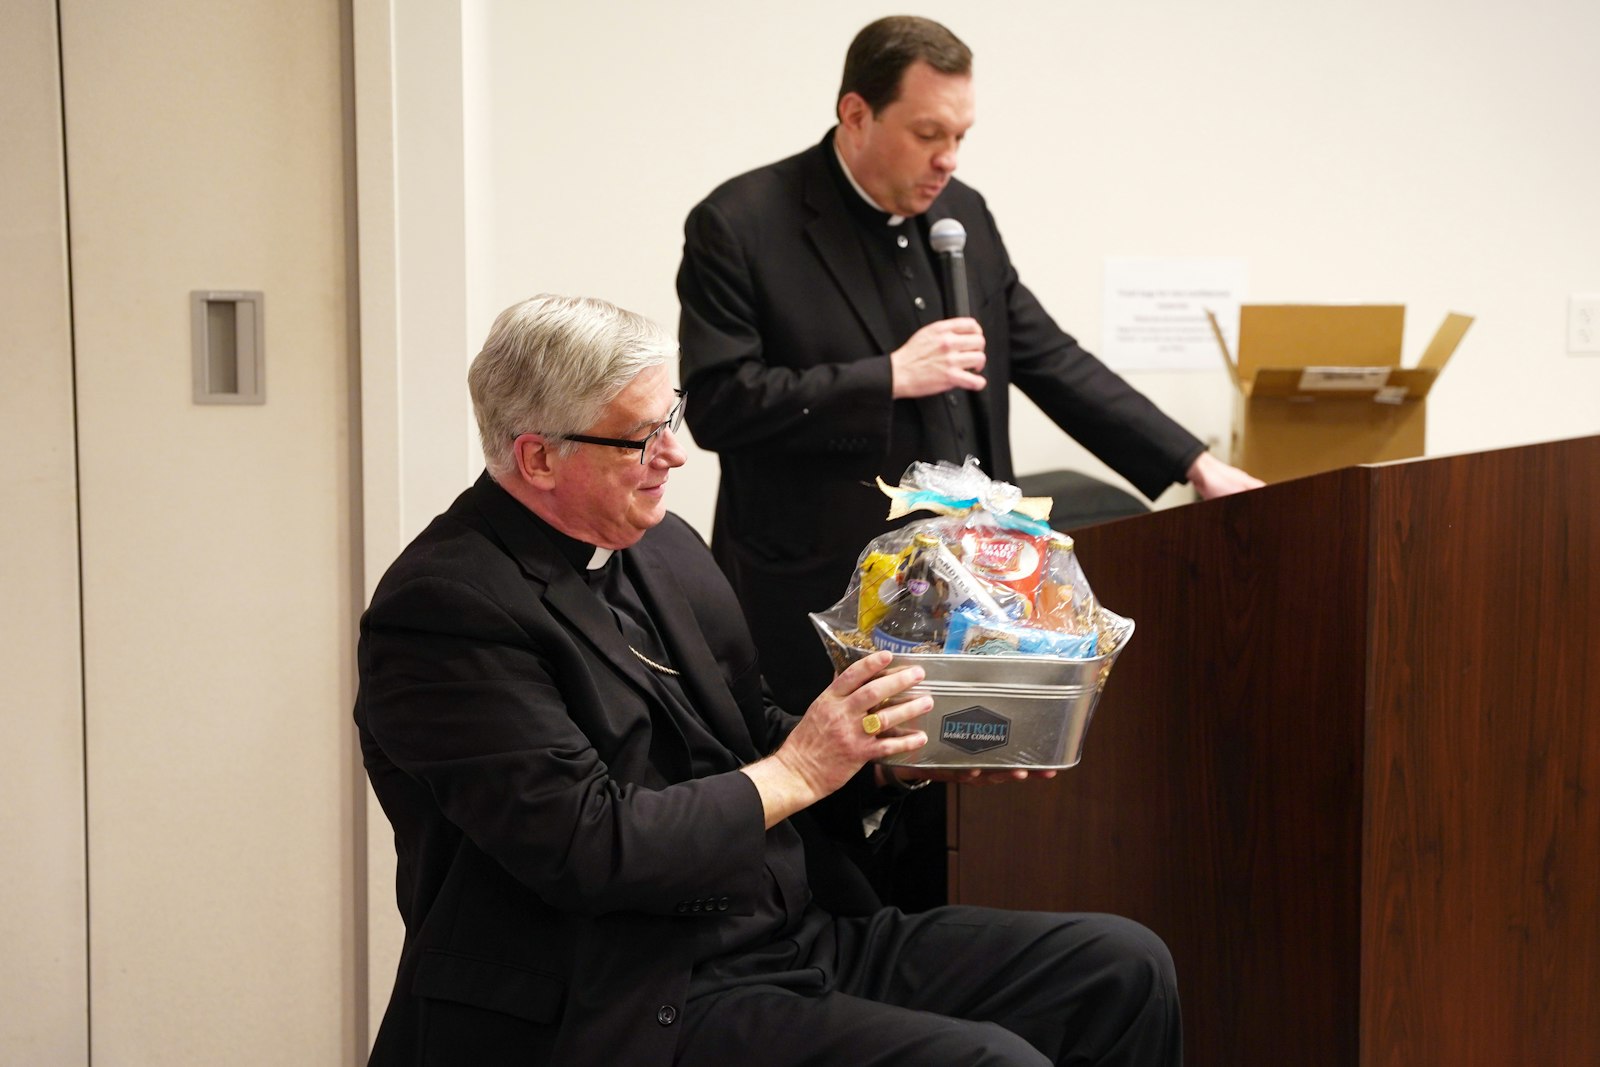 Fr. Jeffrey Day, moderator of the curia for the Archdiocese of Detroit, presents Bishop Battersby with a gift basket filled with Michigan-made products and mementos, a reminder of his roots as he departs for Wisconsin.